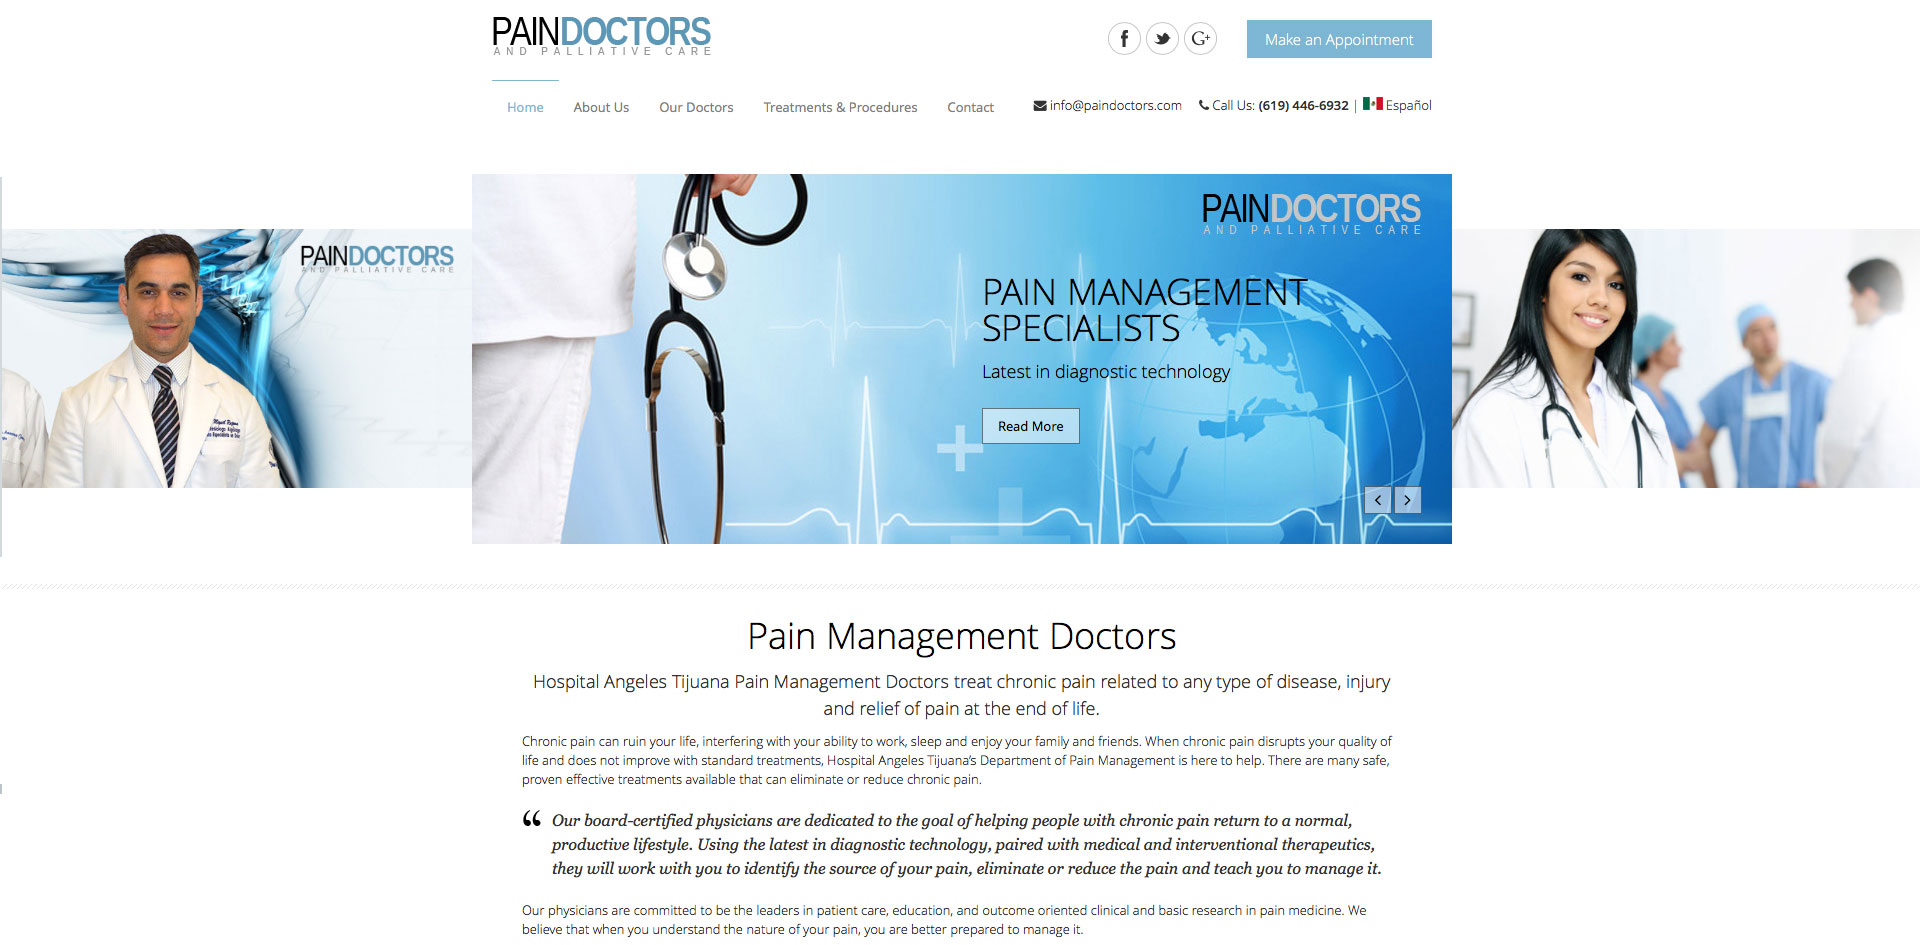 Pain Doctors designed by Blue Guys